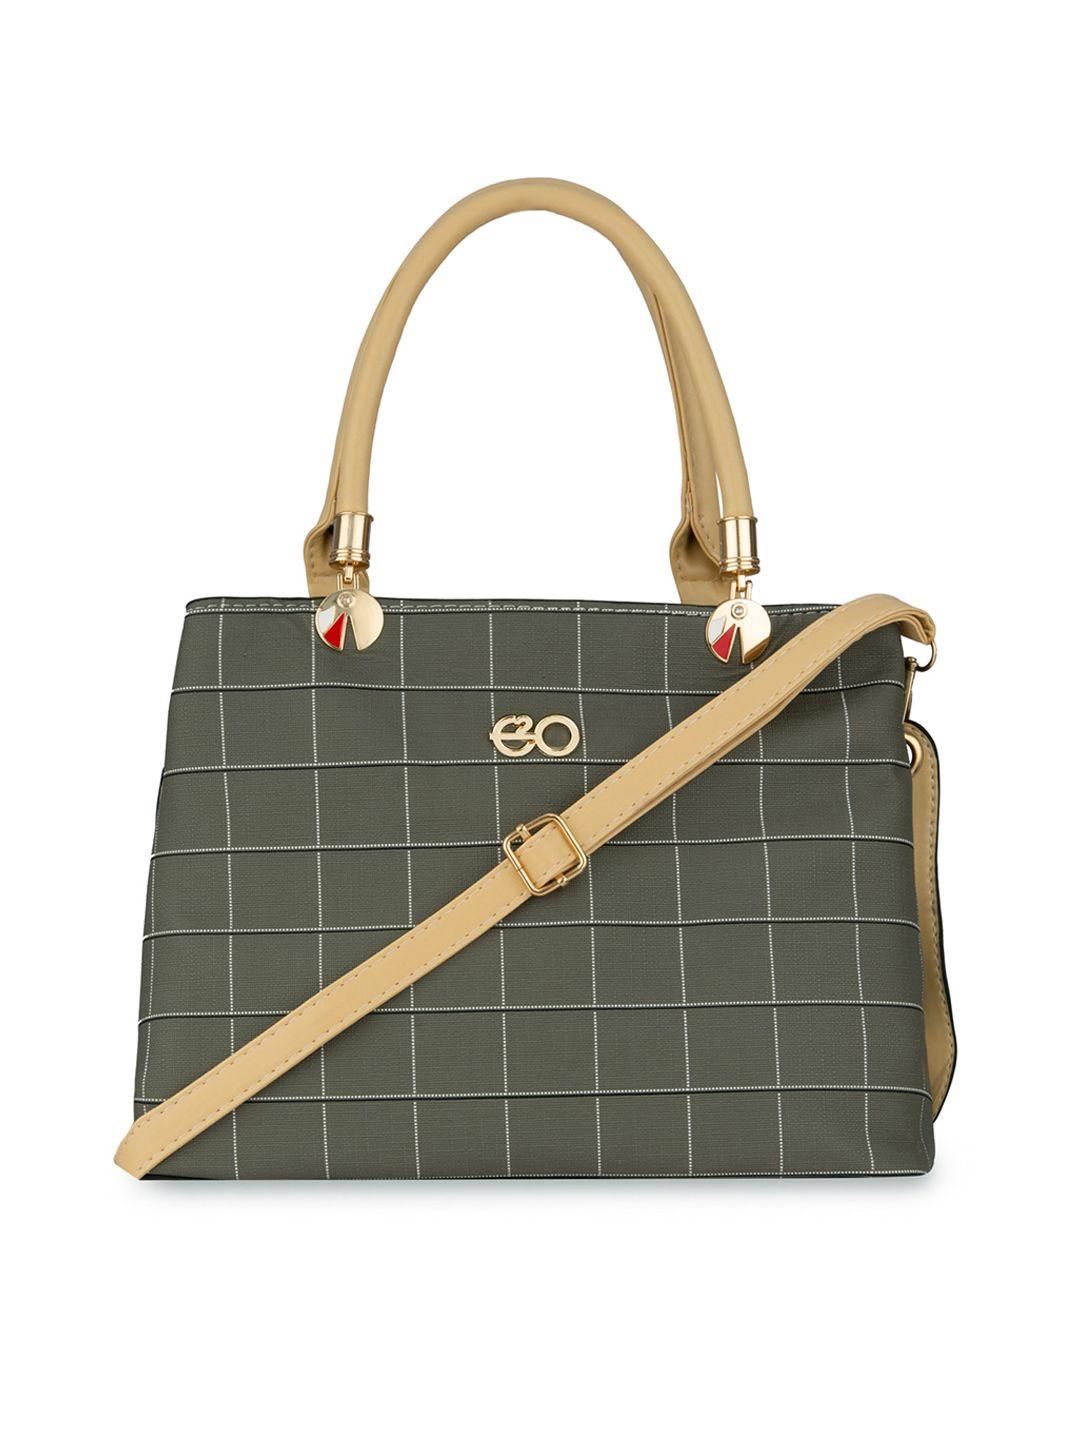 e2o checked pu structured handheld bag